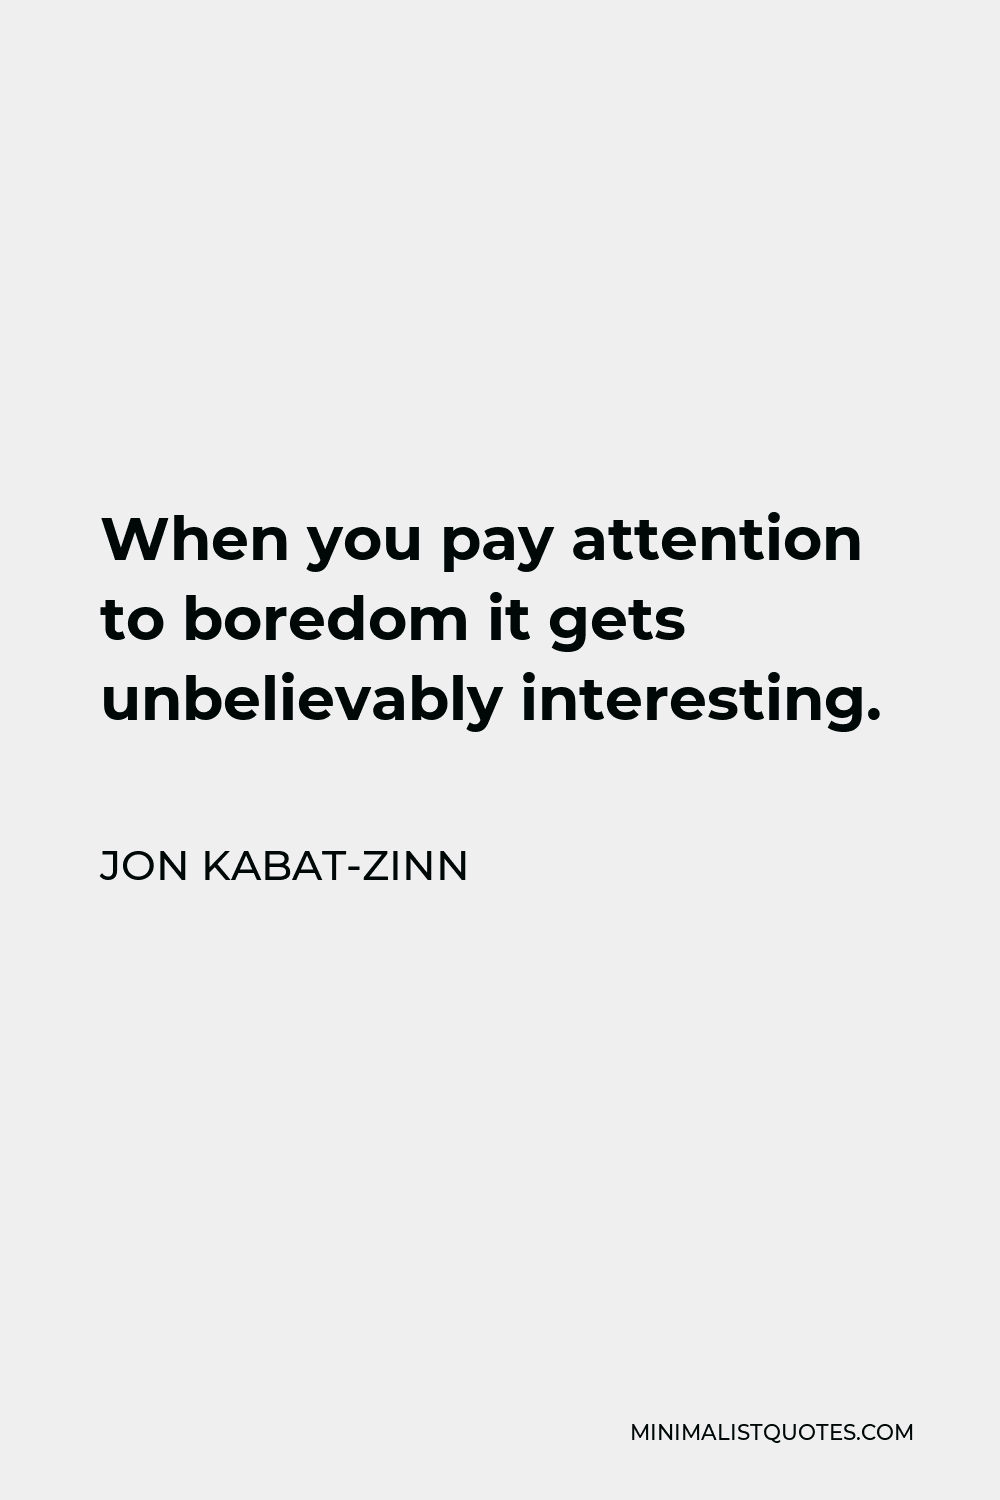 Jon Kabat-Zinn Quote - When you pay attention to boredom it gets unbelievably interesting.